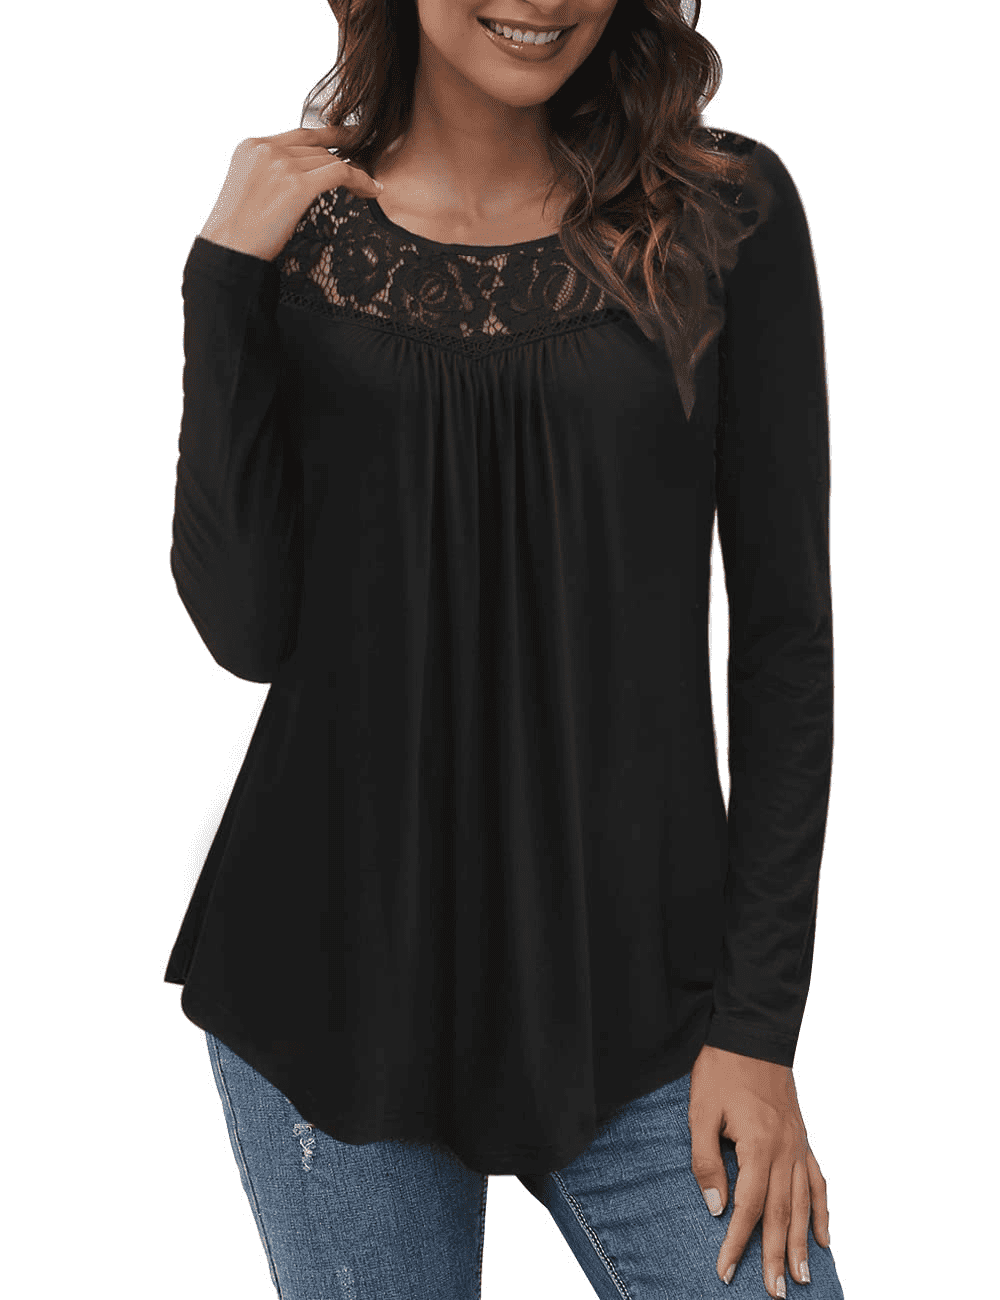 CPOKRTWSO Womens Clothes Plus Size Tunic Tops Long Sleeve Shirts ...